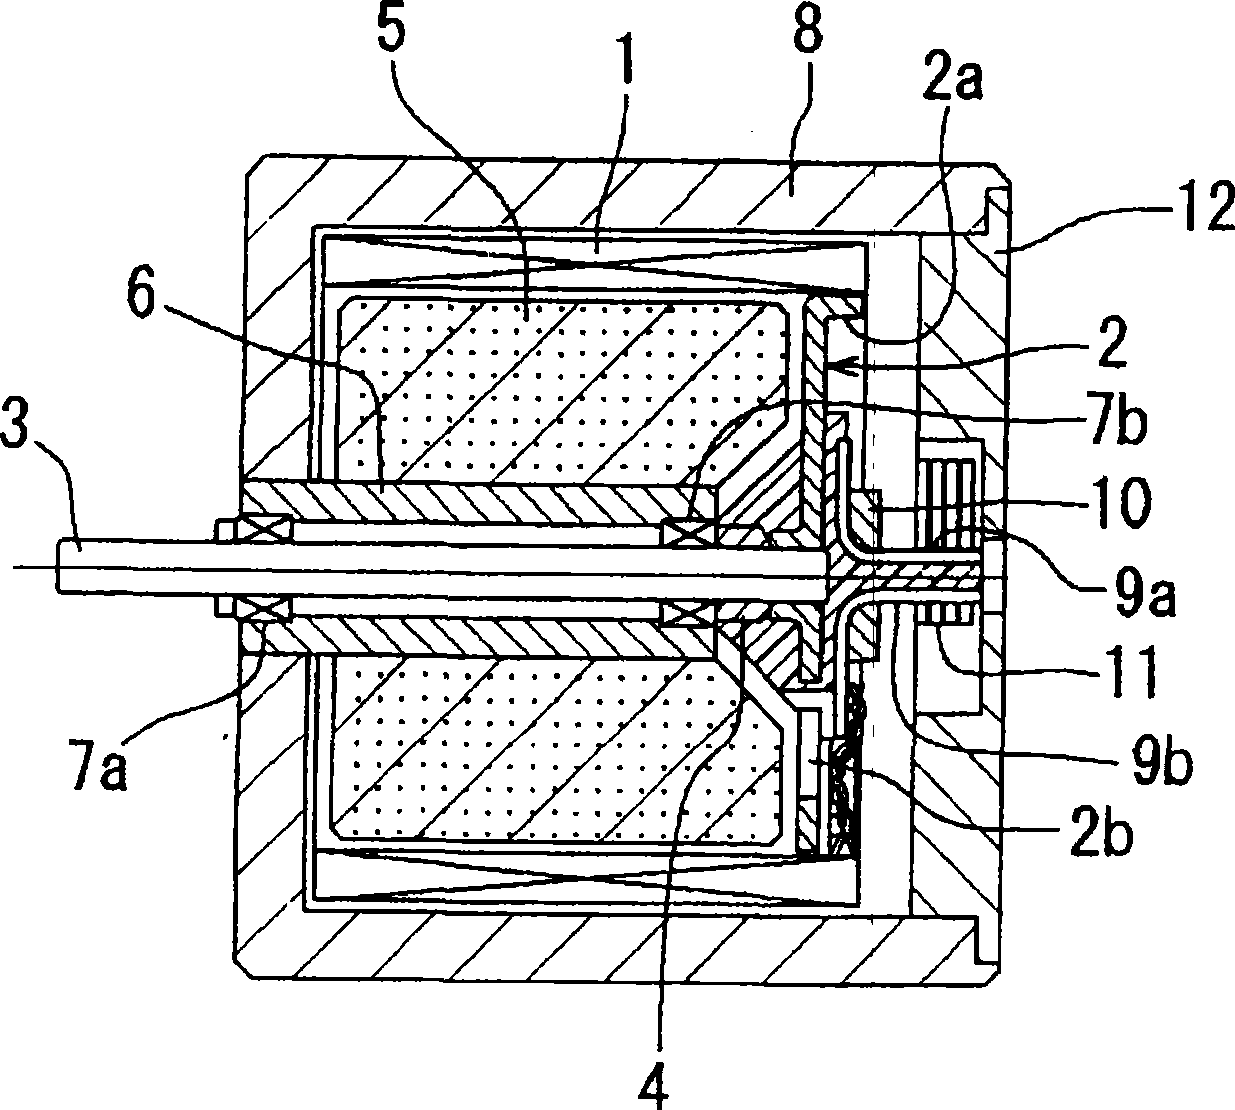 Small size core free motor and wireless operating model game apparatus